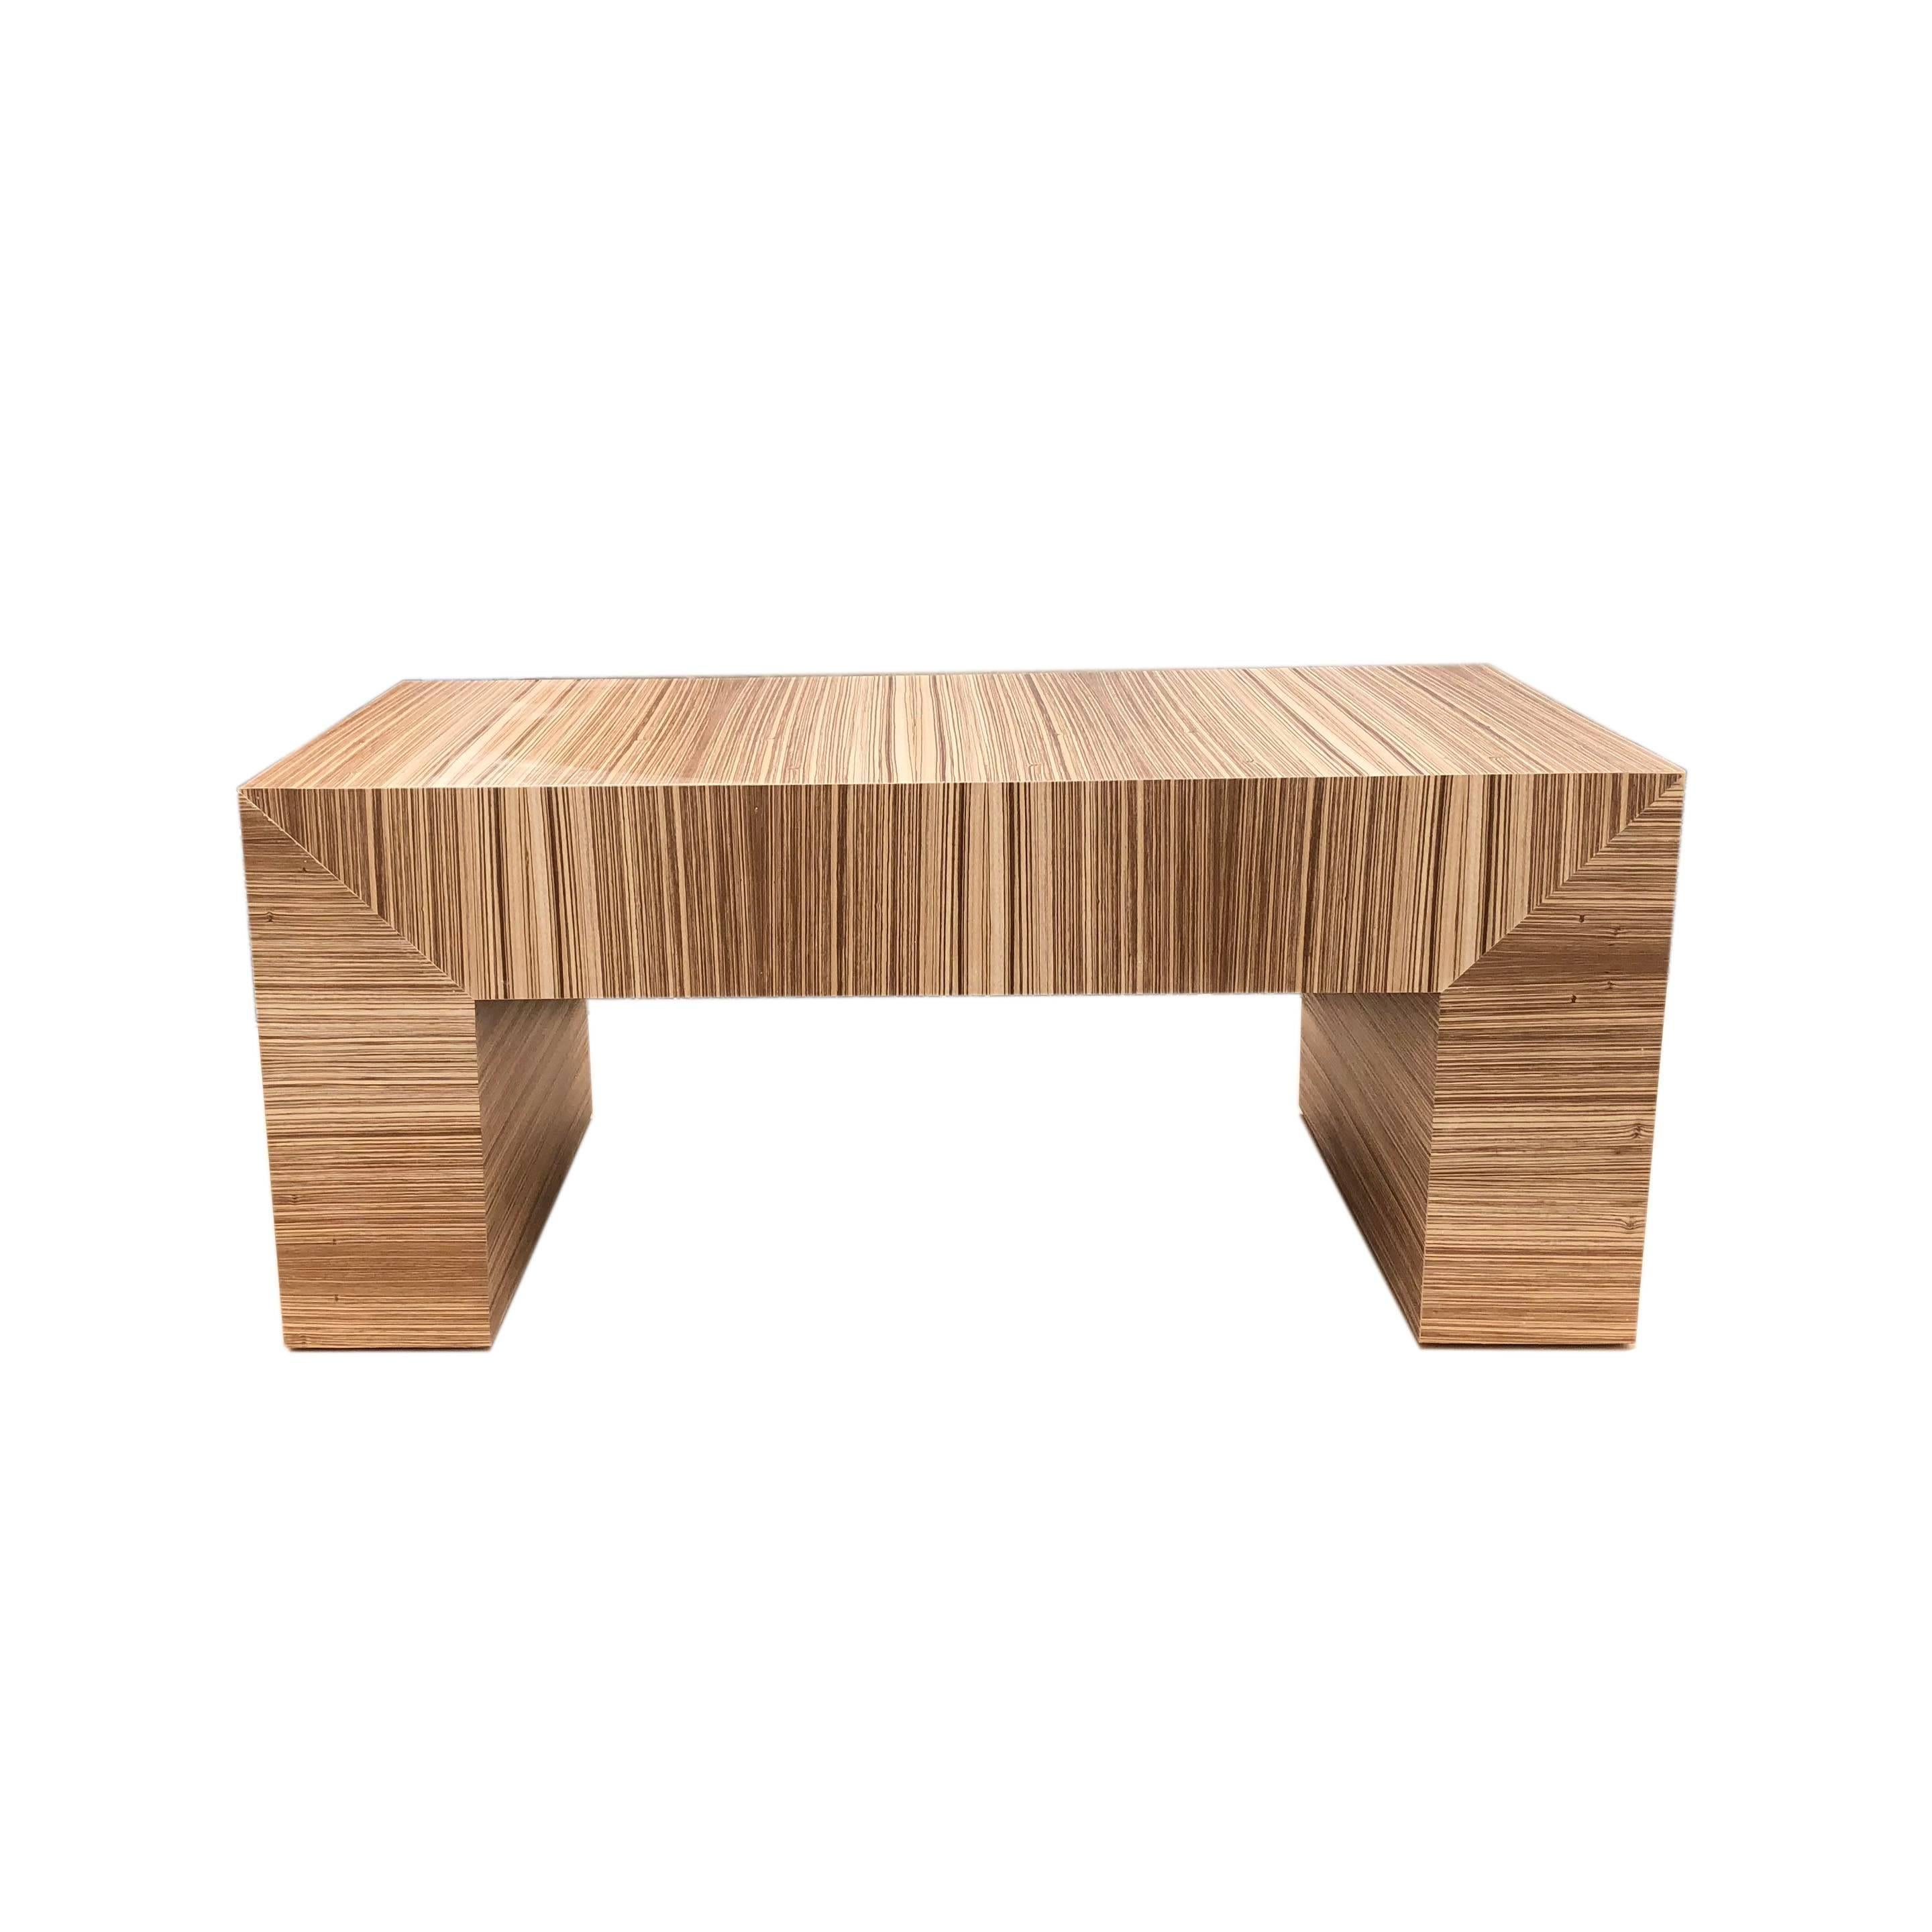 One of a kind, clean, sleek lined modern zebra wood coffee table. Constructed of the finest exotic veneer zebra wood. Also available in custom sizes.